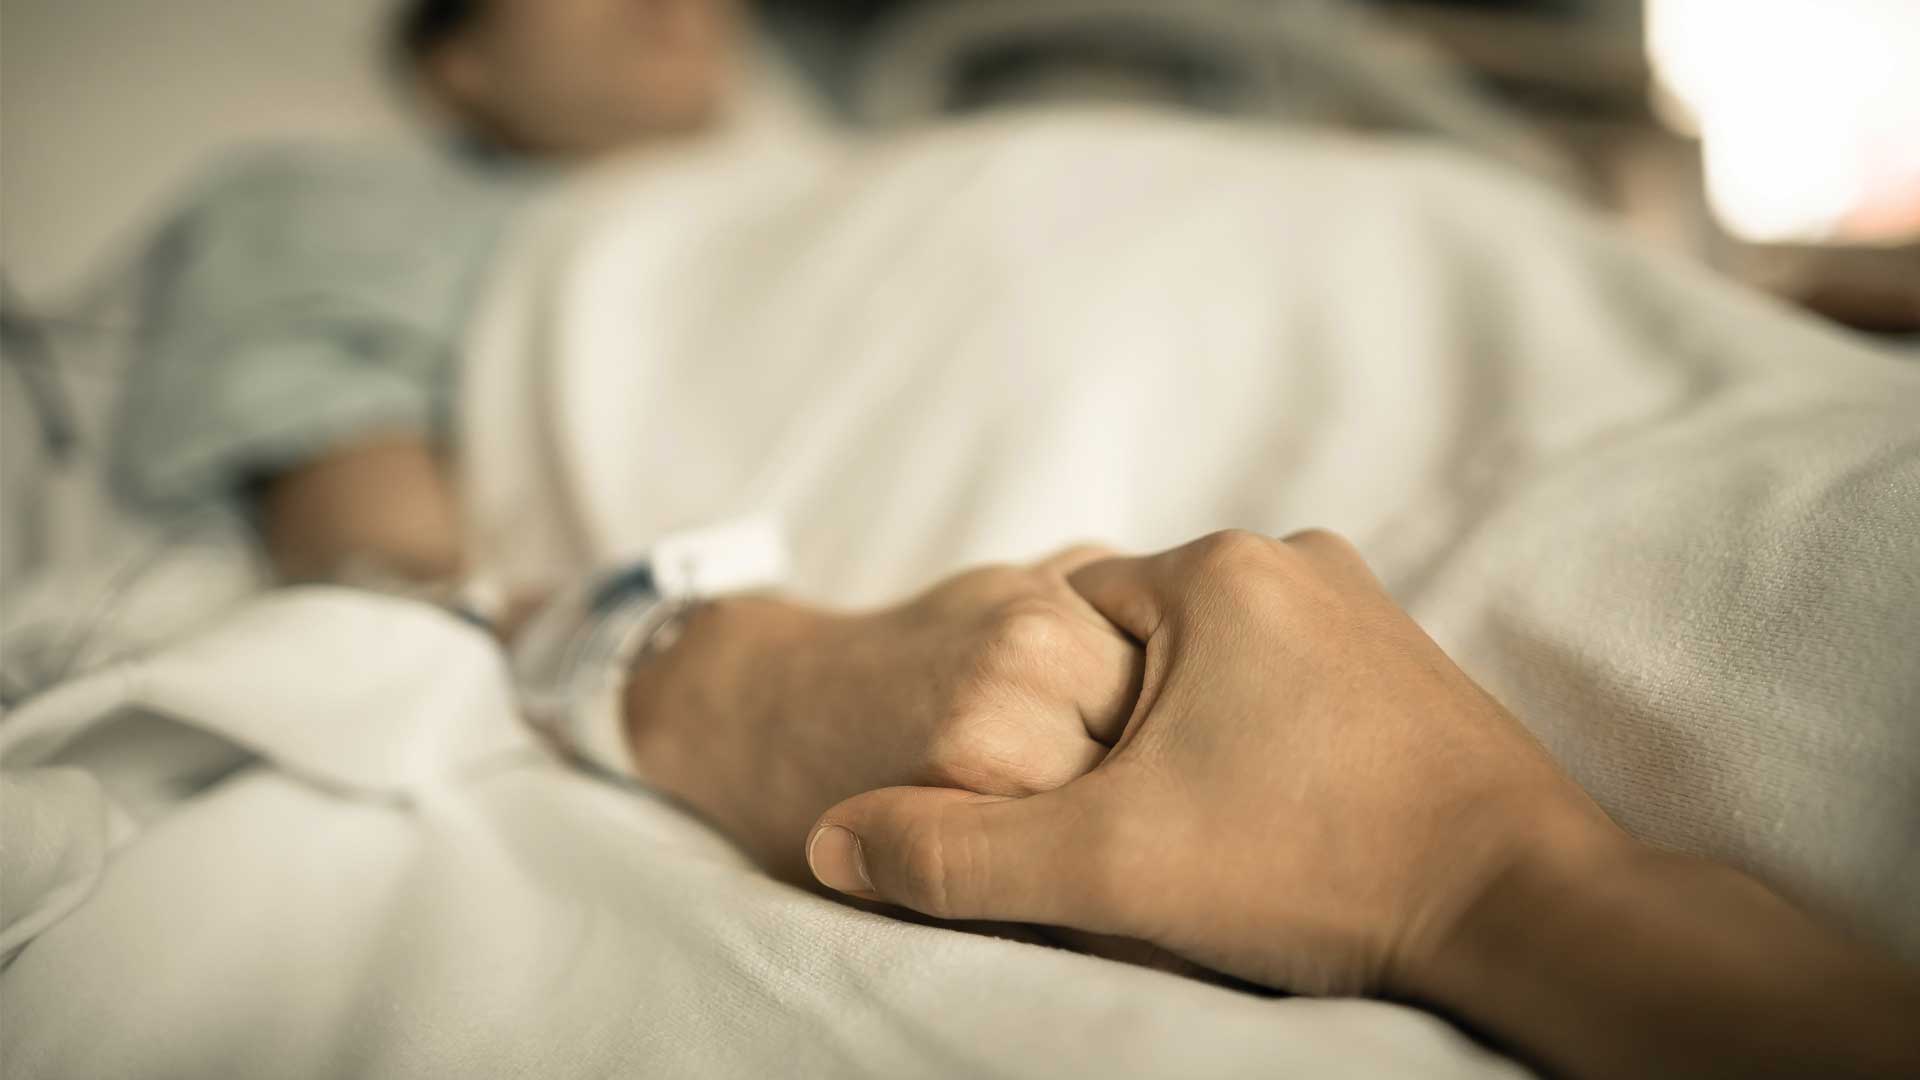 holding dying person's hand